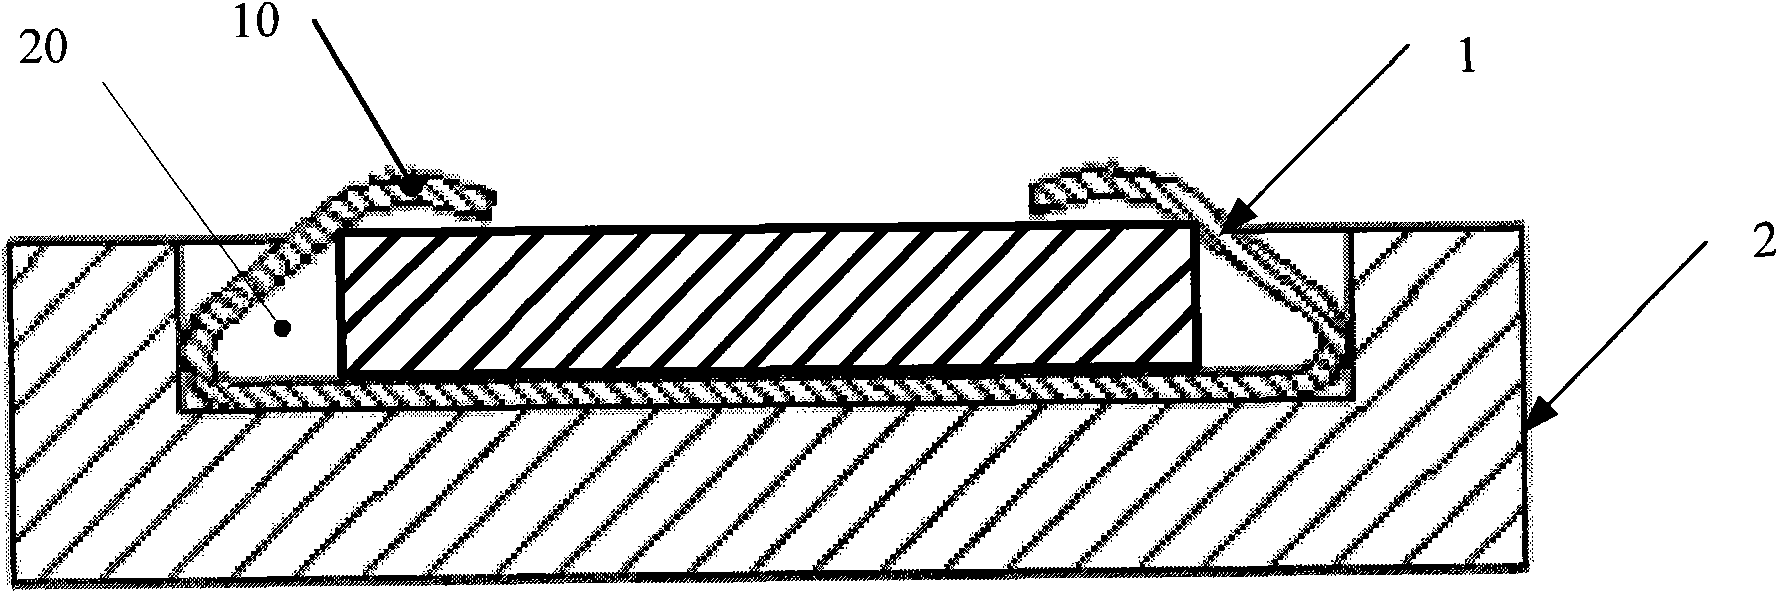 Connector among plates and electronic device